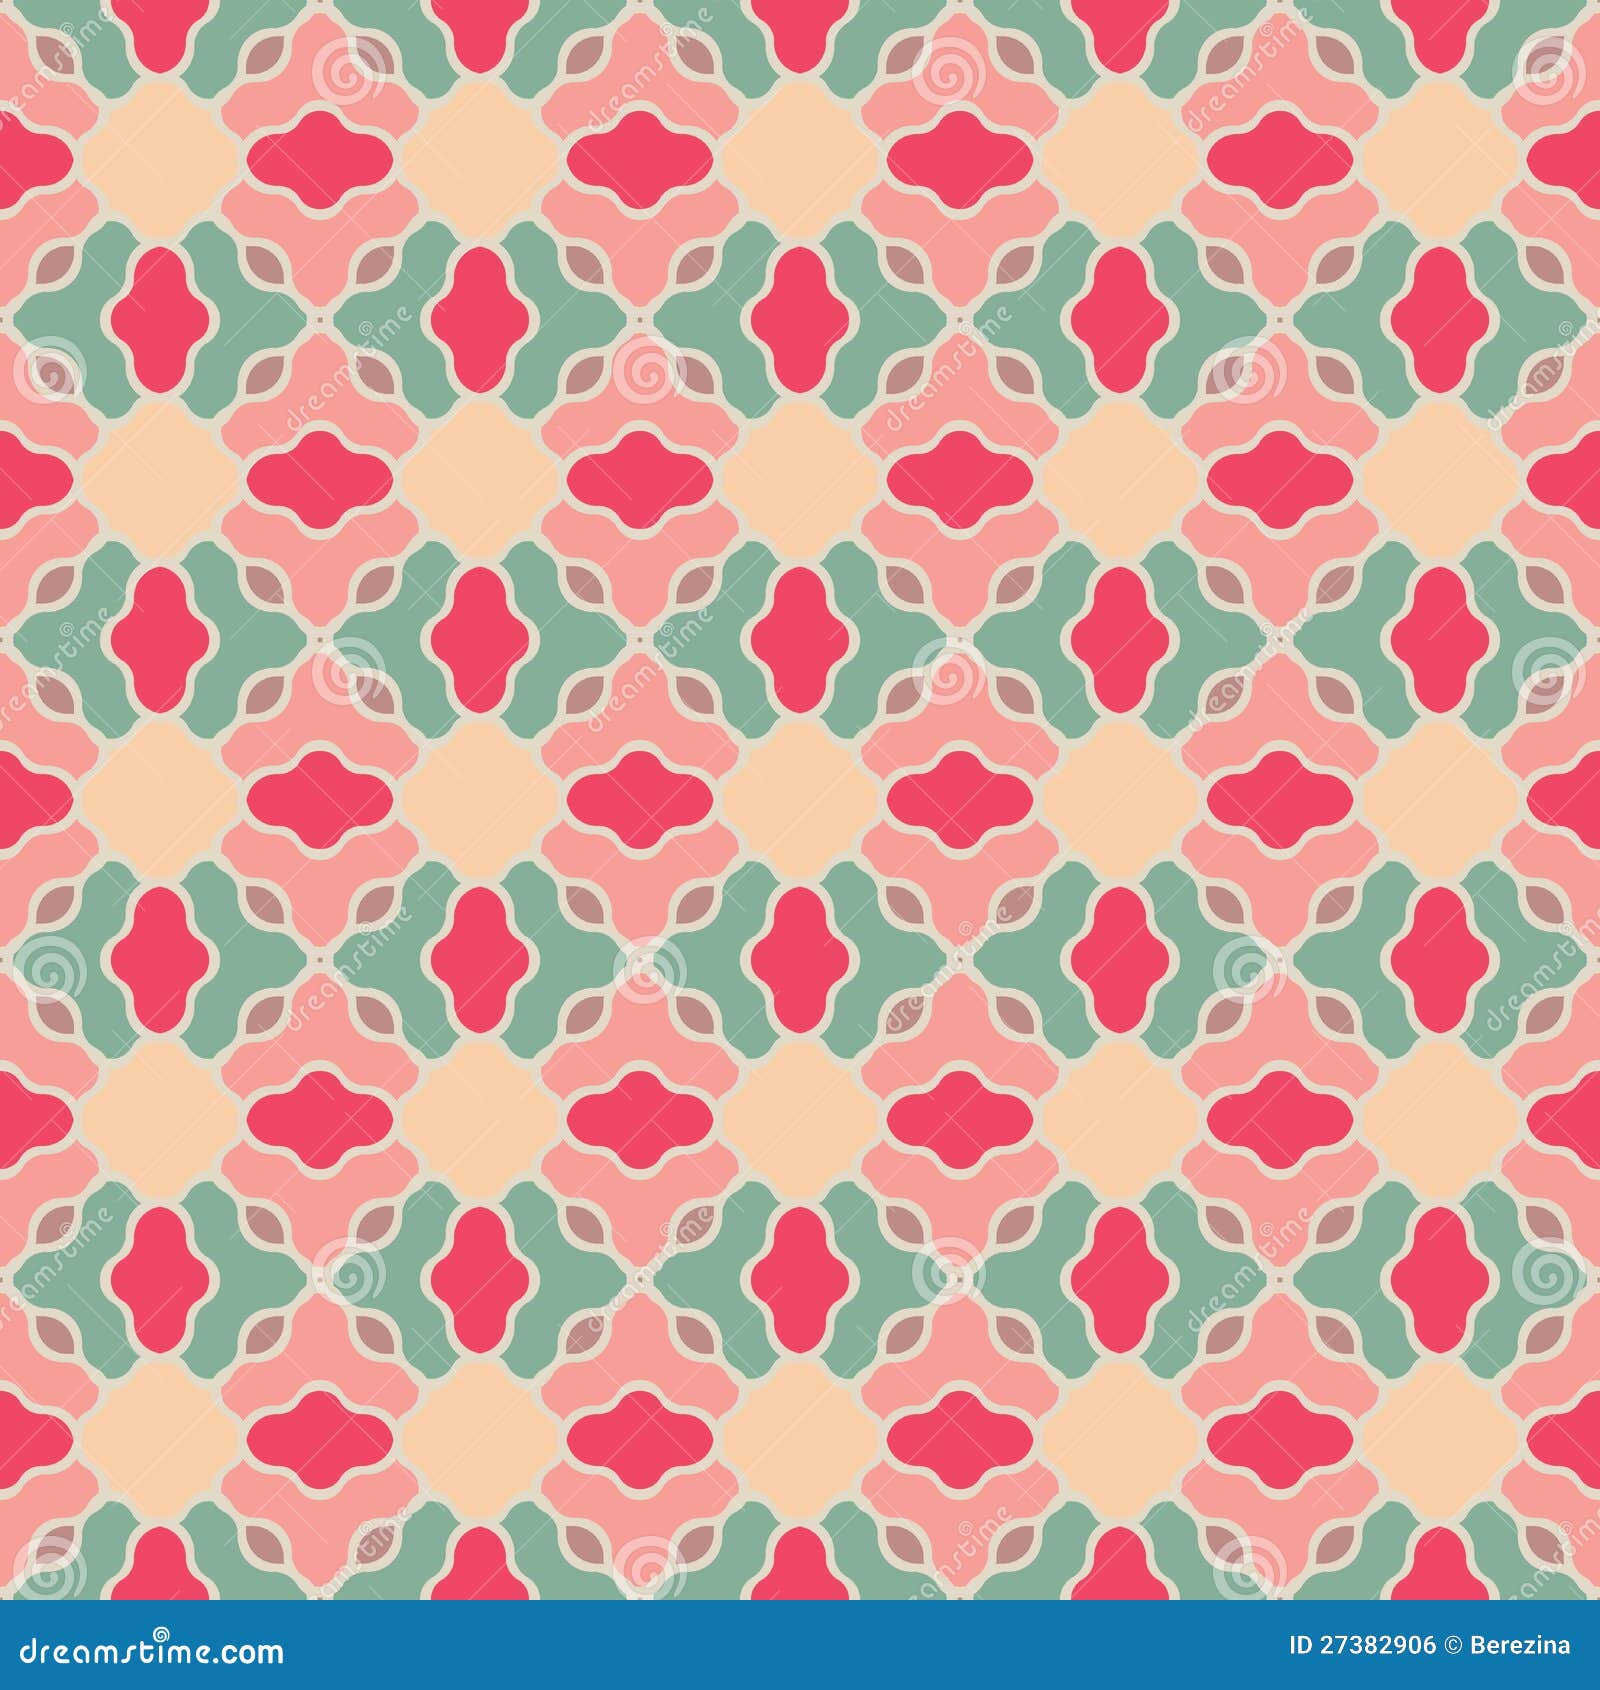 Mosaic vector pattern with pink and green elements